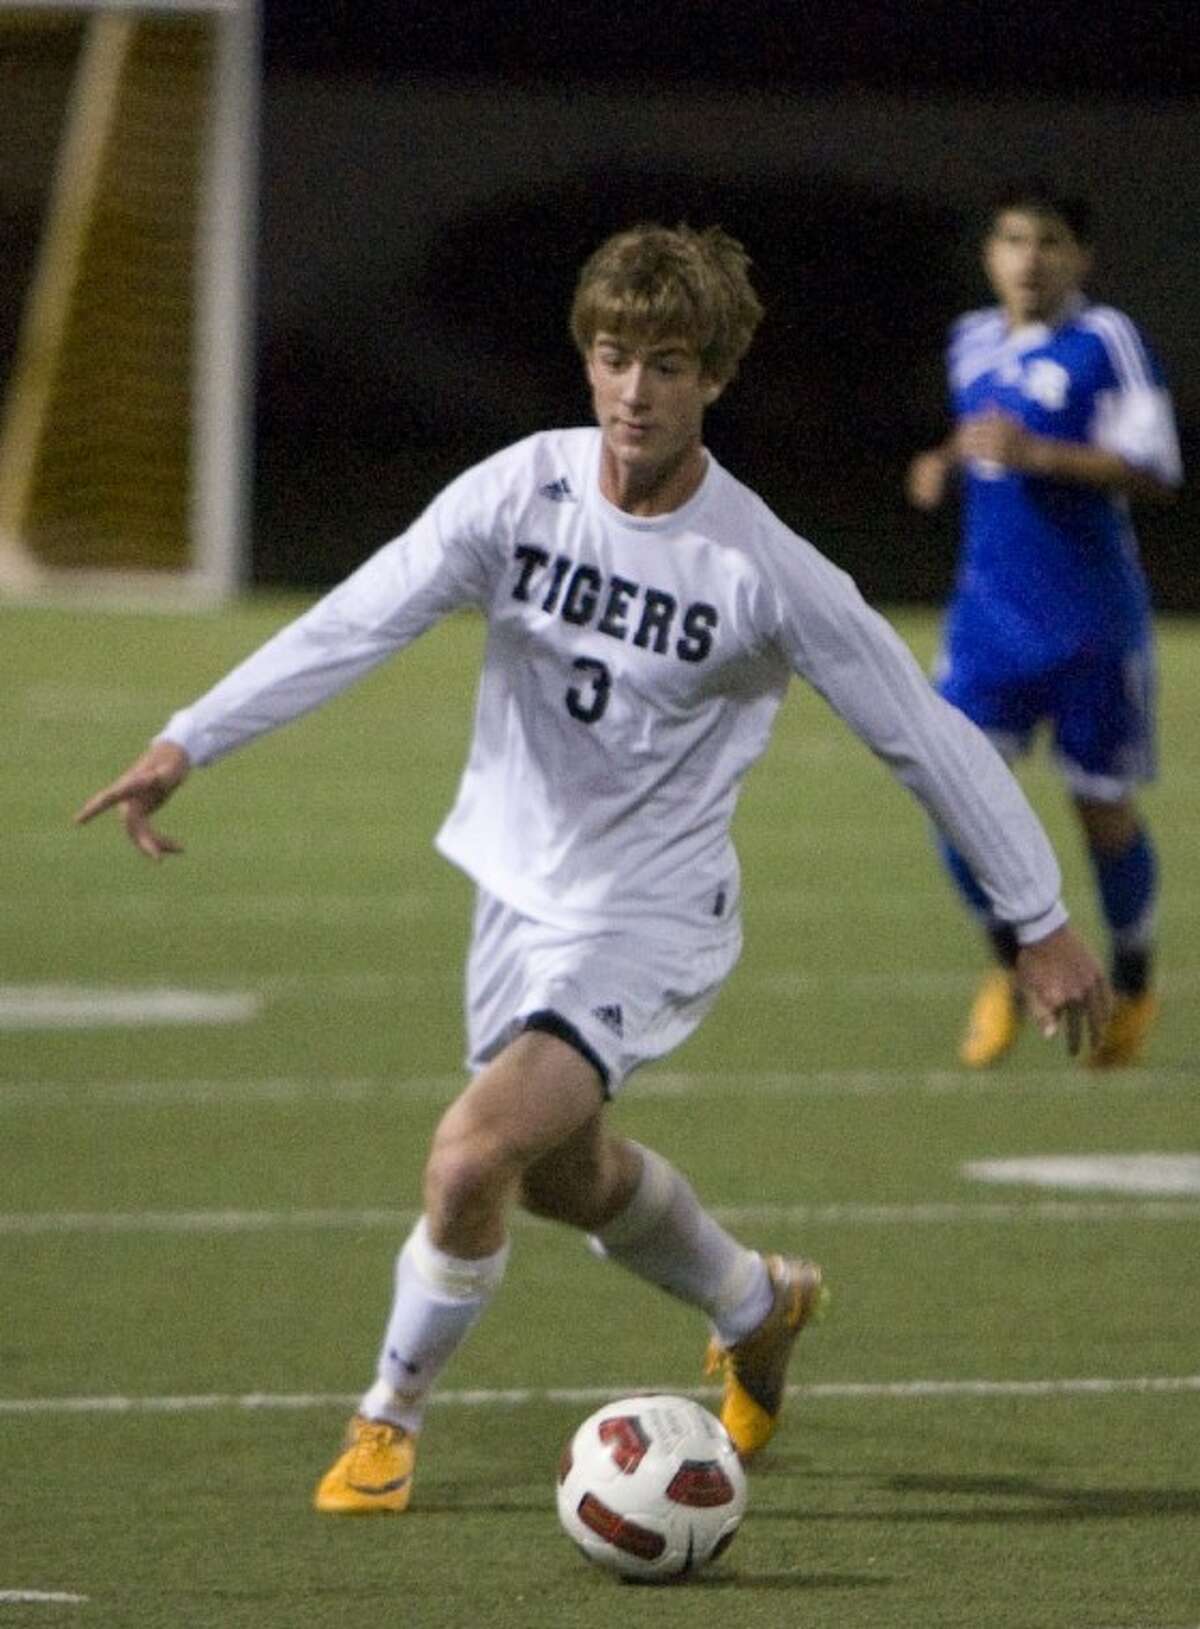 Conroe's Jonathan Cutaia dribbles downfield during Tuesday night's game against New Caney at Moorhead Stadium in Conroe.